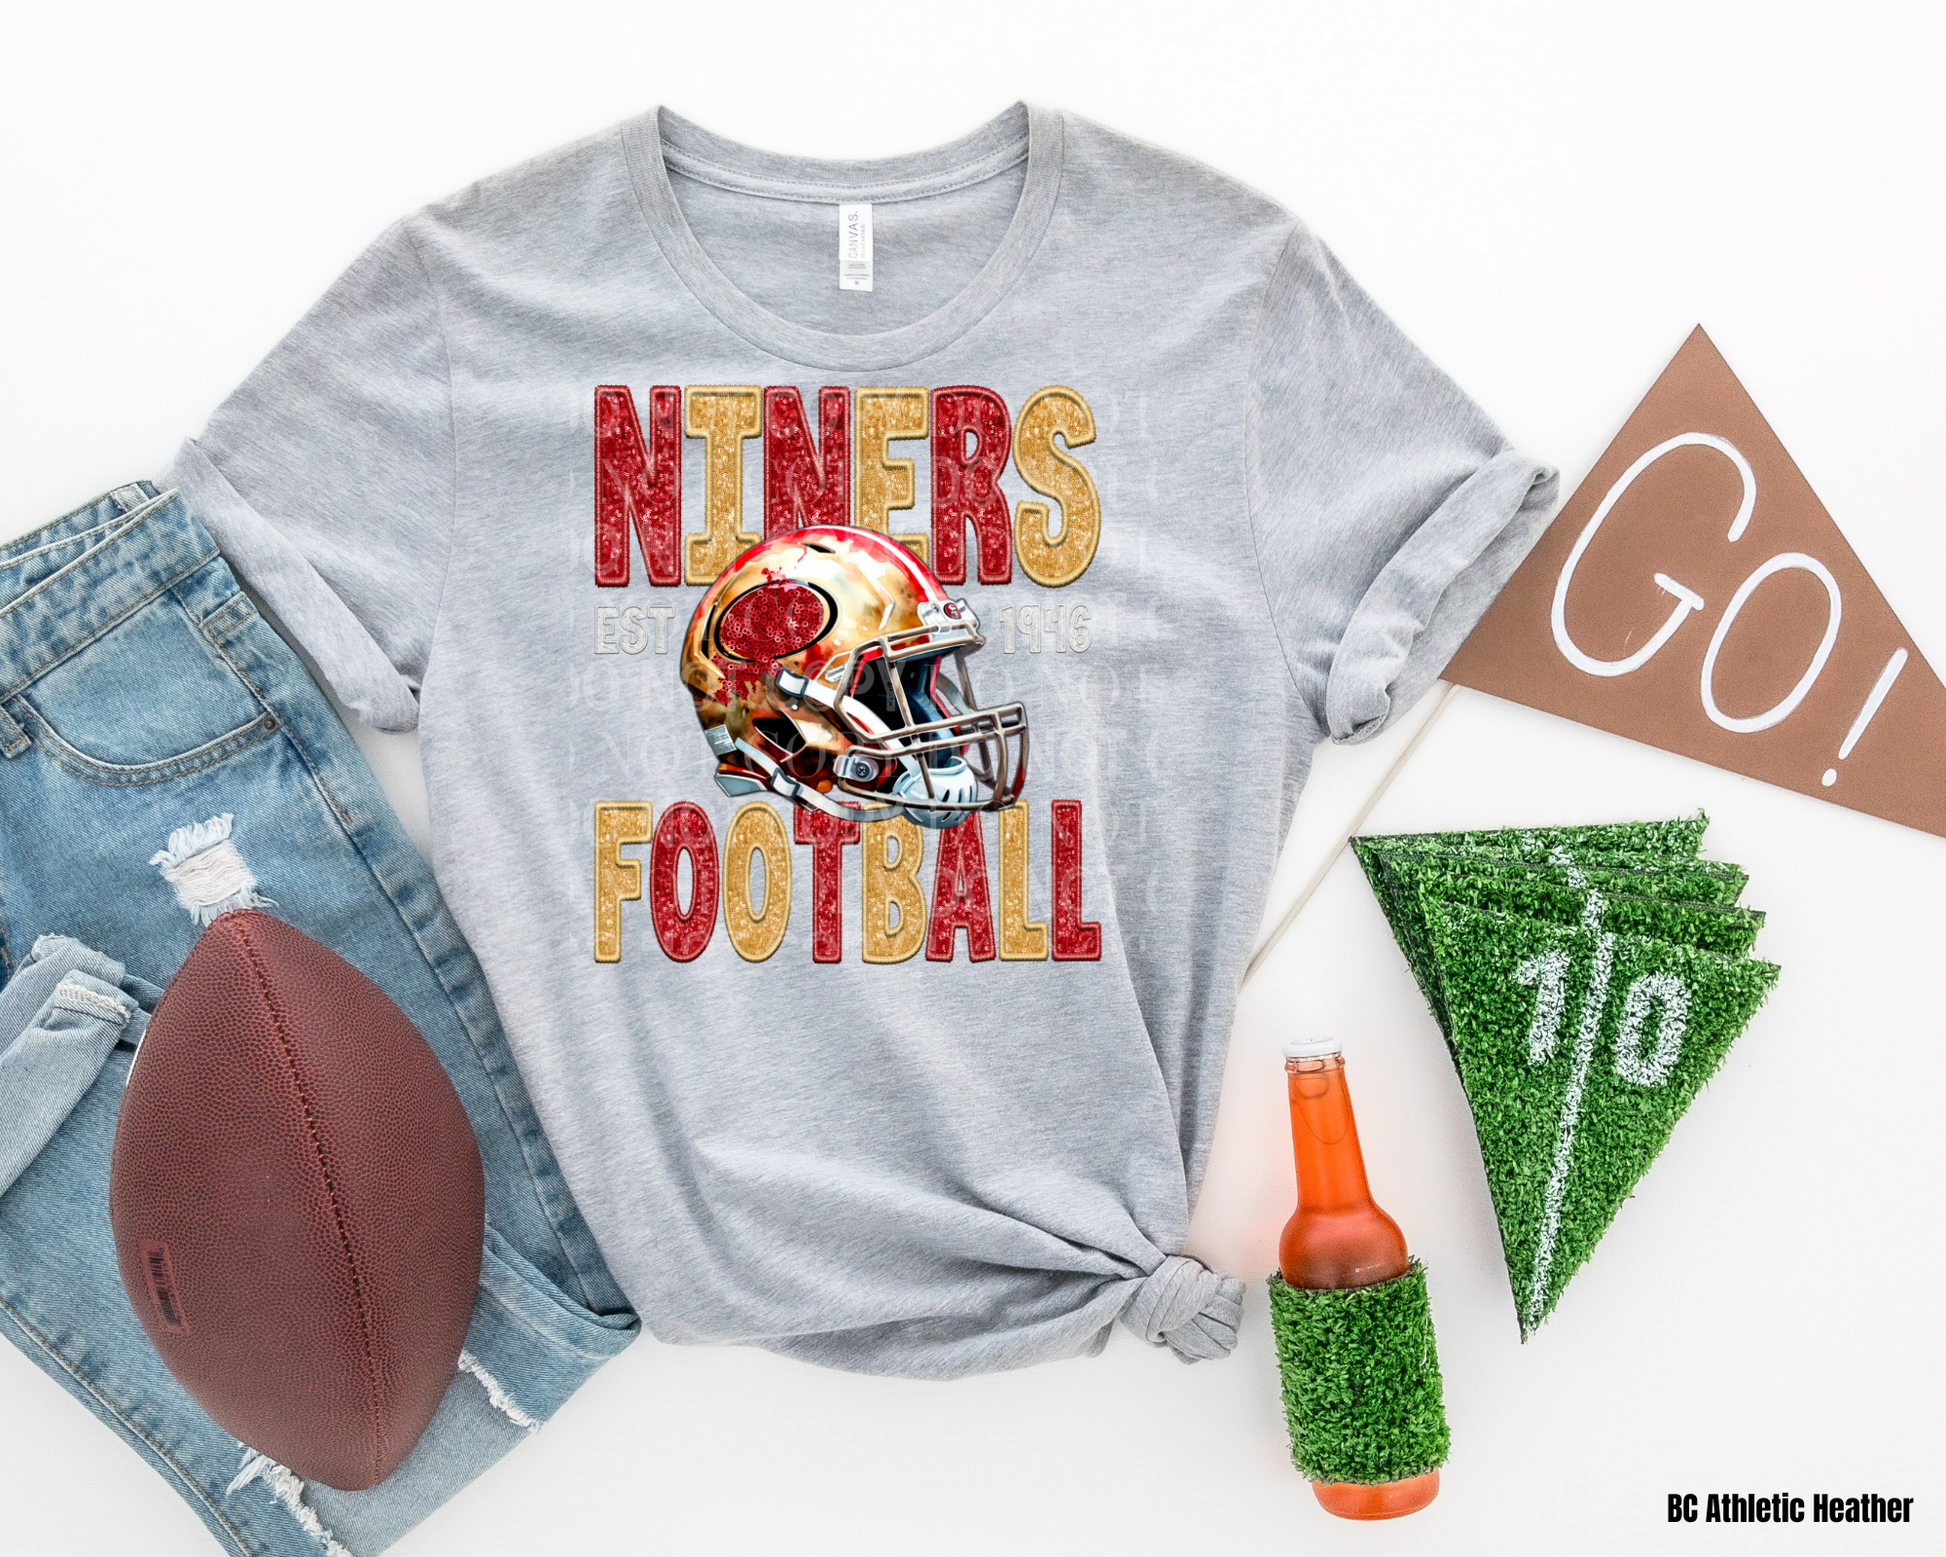 NFL Fashion Trends: Stylish Ways to Support Your Team by  NFLUglyChristmasSweater - Issuu